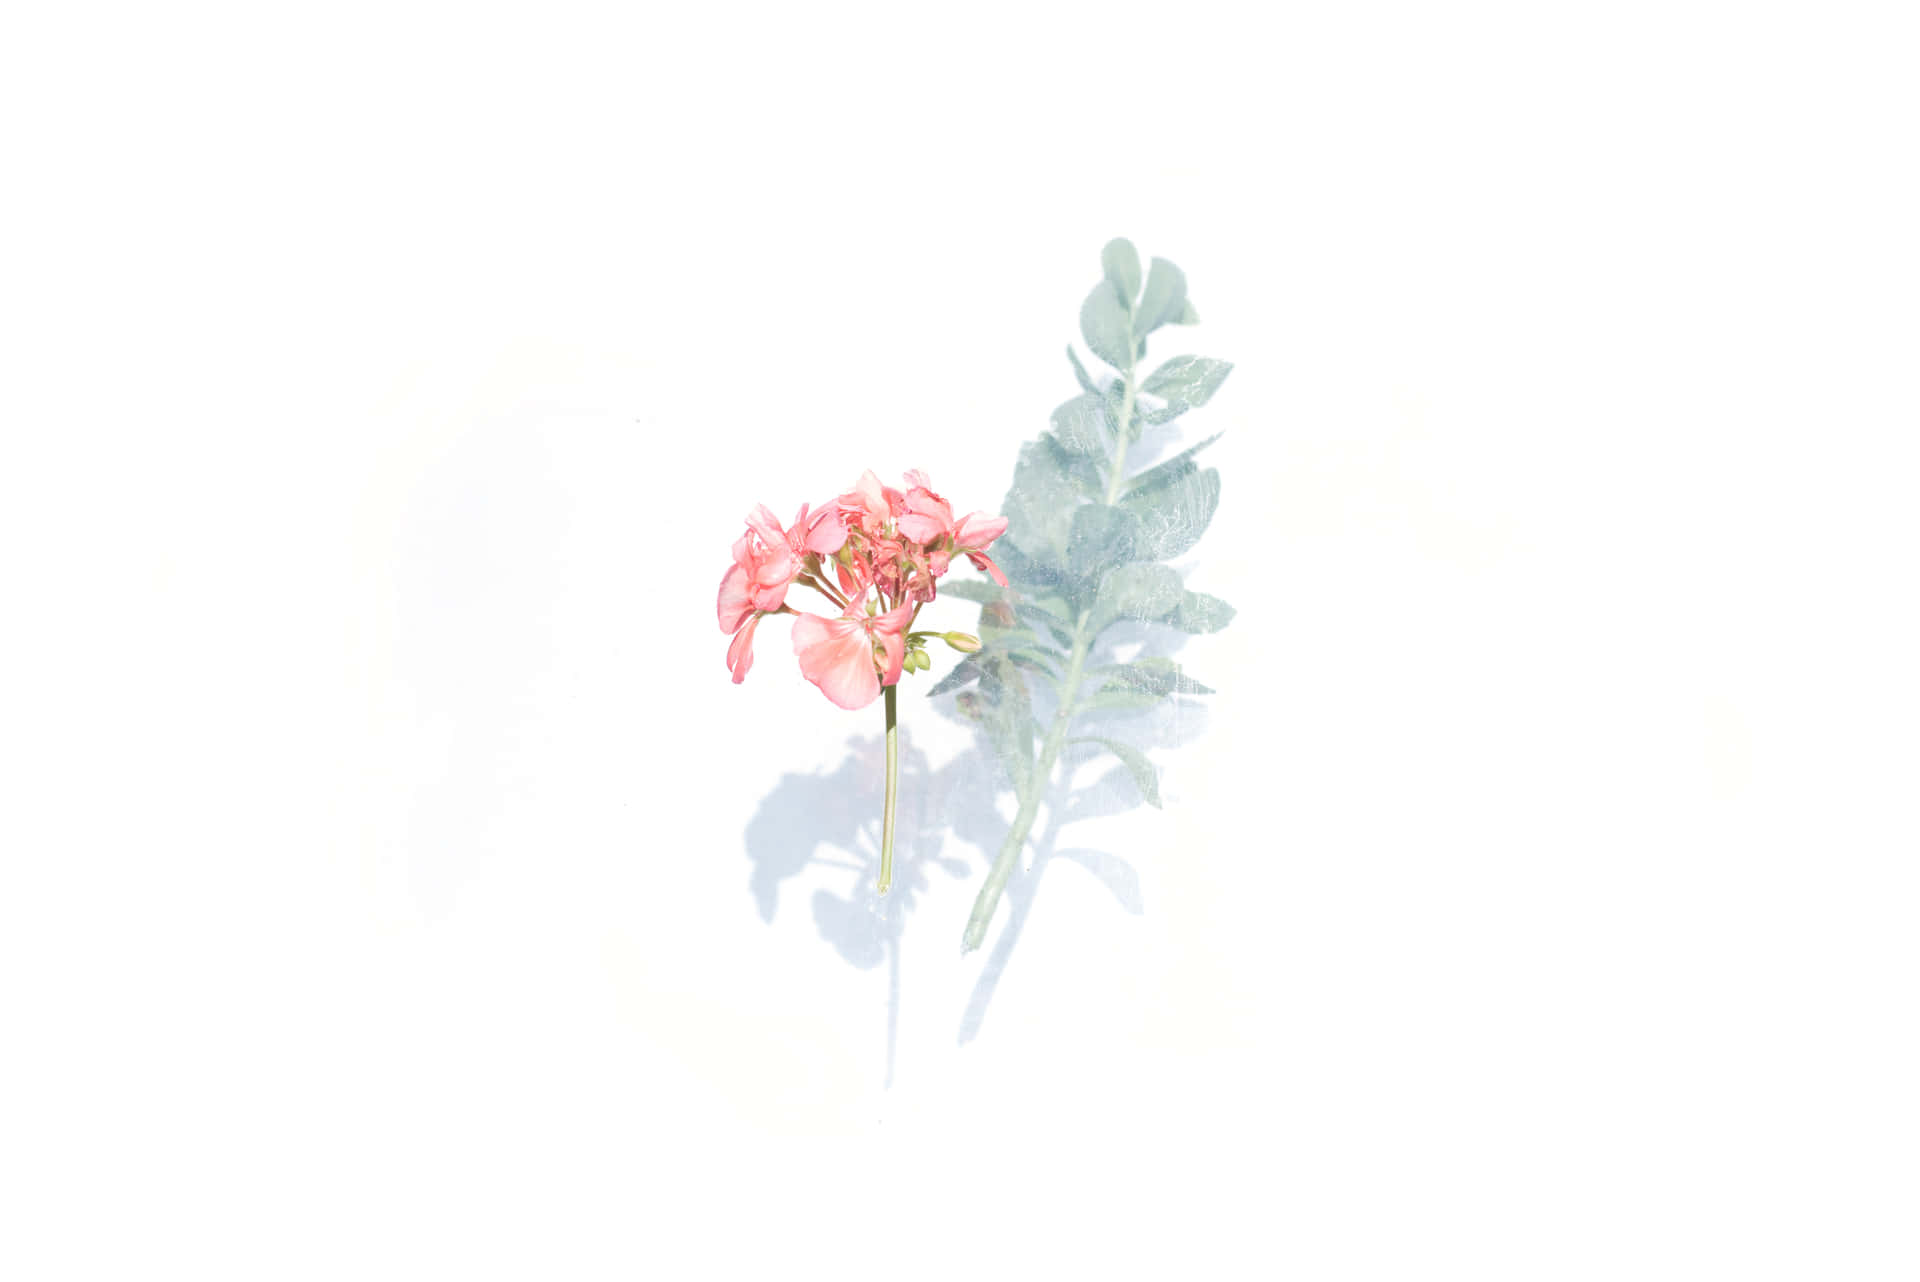 A Watercolor Painting Of A Pink Flower And Green Leaves Wallpaper